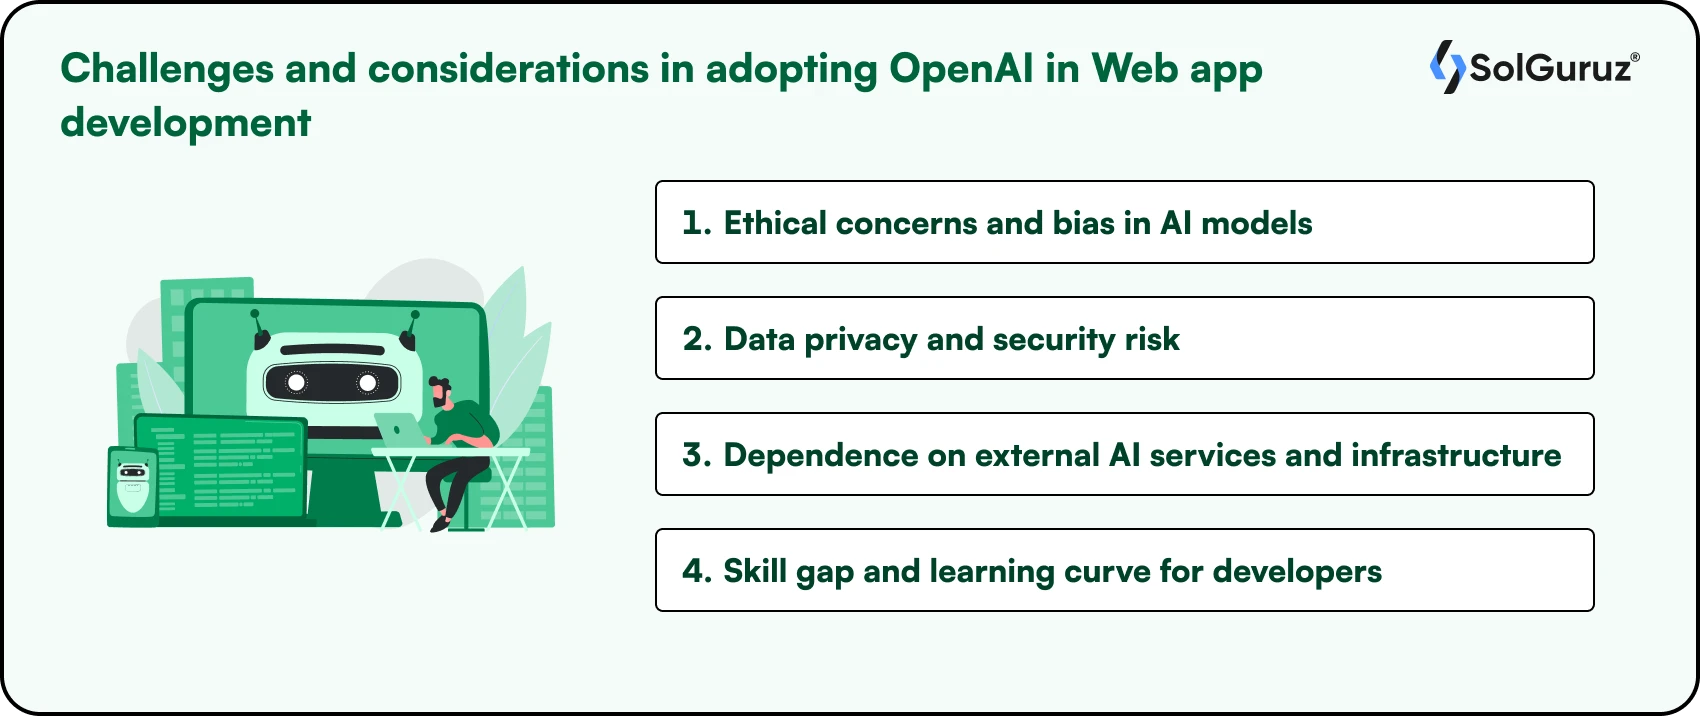 Challenges and considerations in adopting OpenAI in Web app development